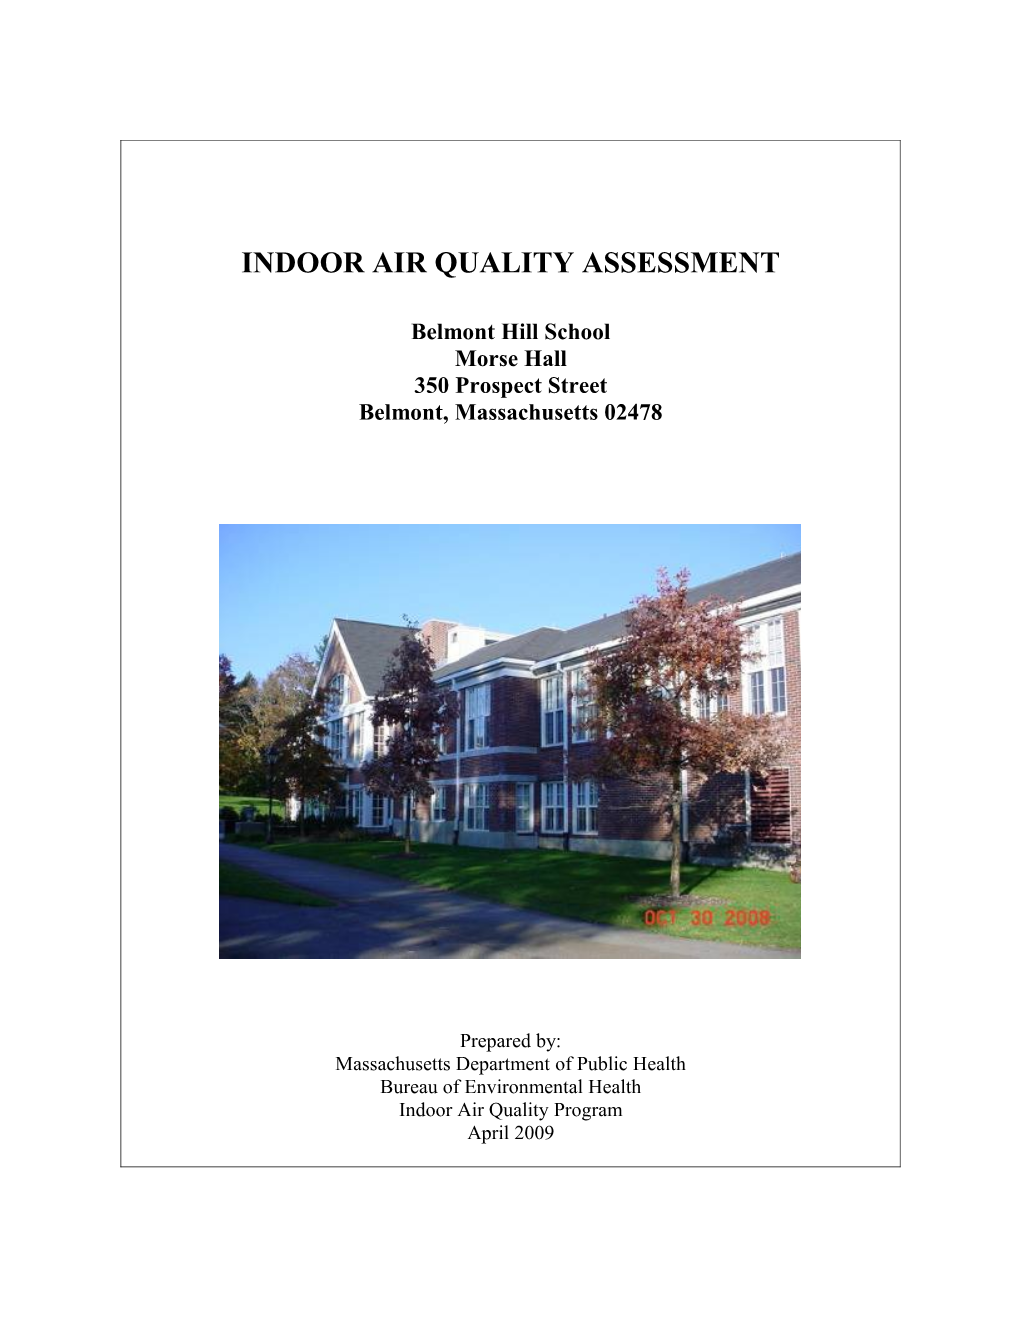 INDOOR AIR QUALITY ASSESSMENT Belmont Hill School, Morse Hall